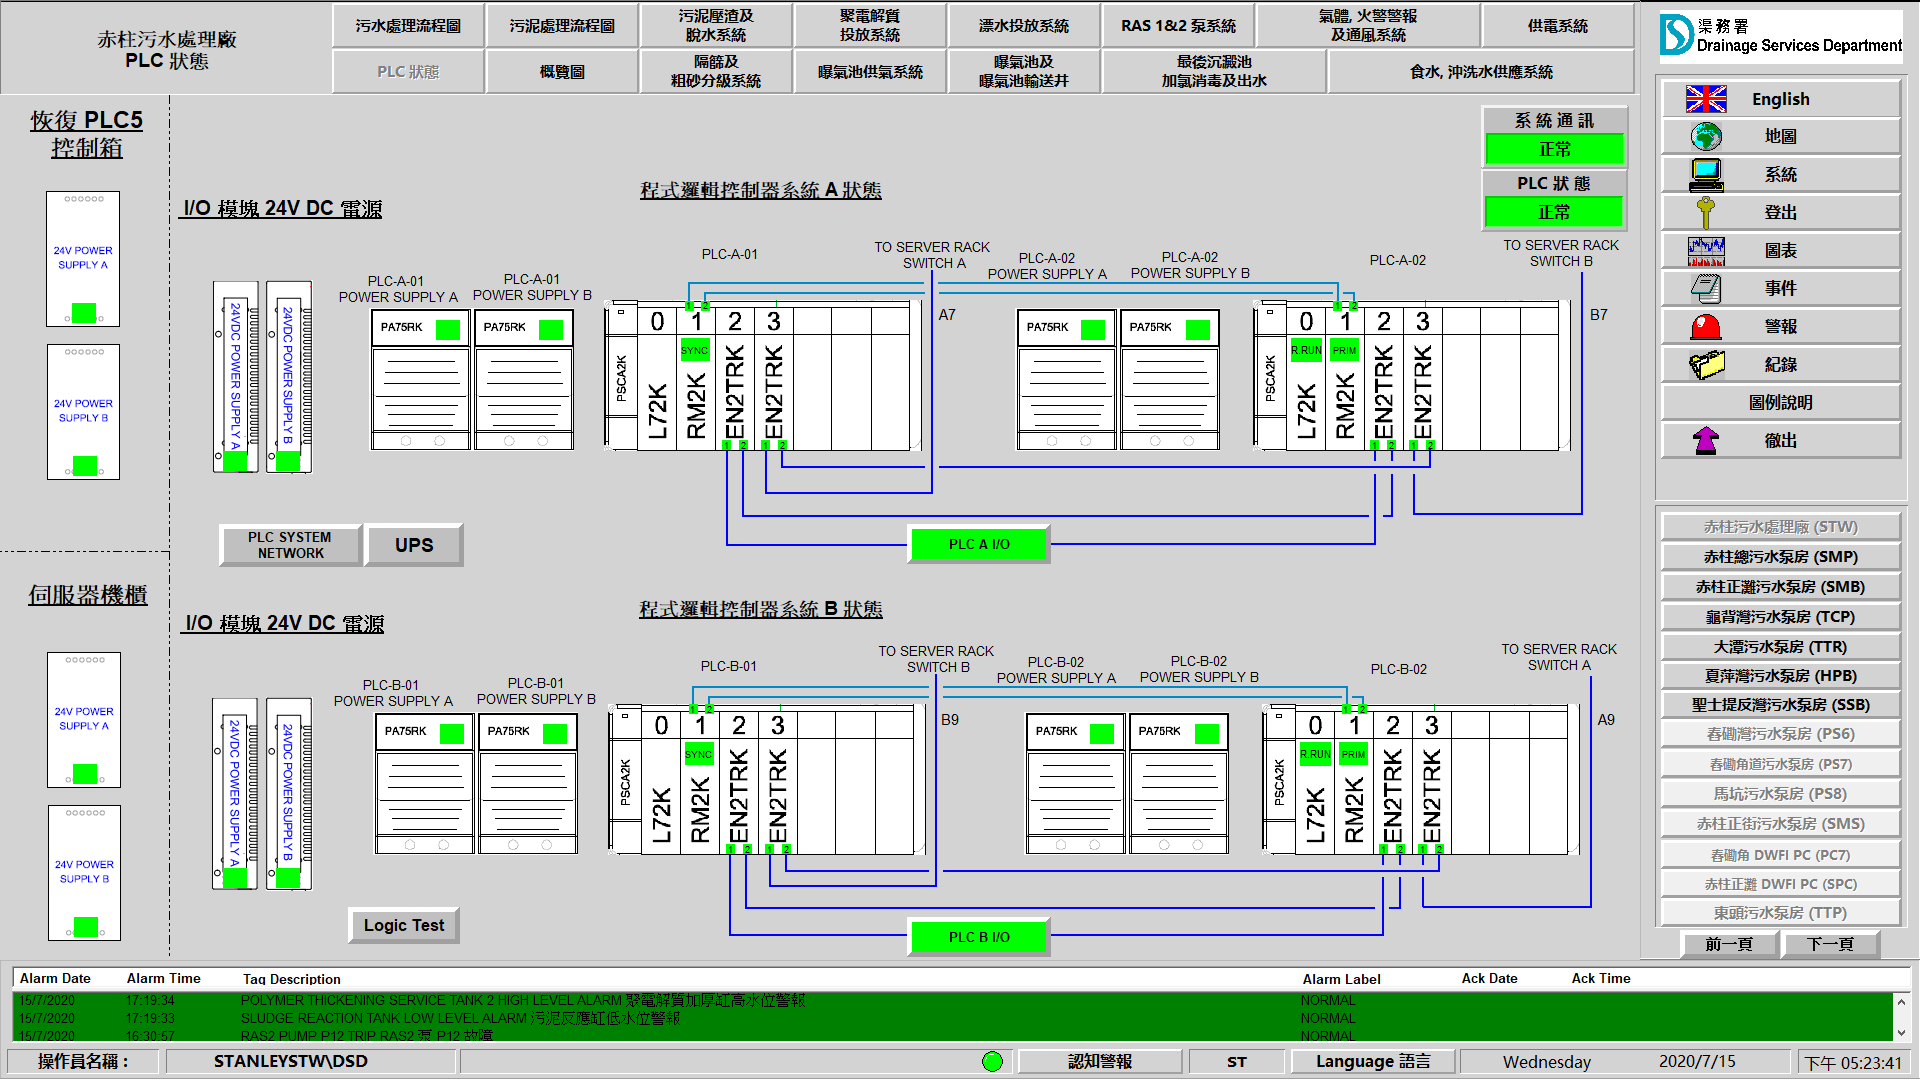 New PLC System Status screenshot from FactoryTalk View After Works in DSD Stanley STW (Typical)